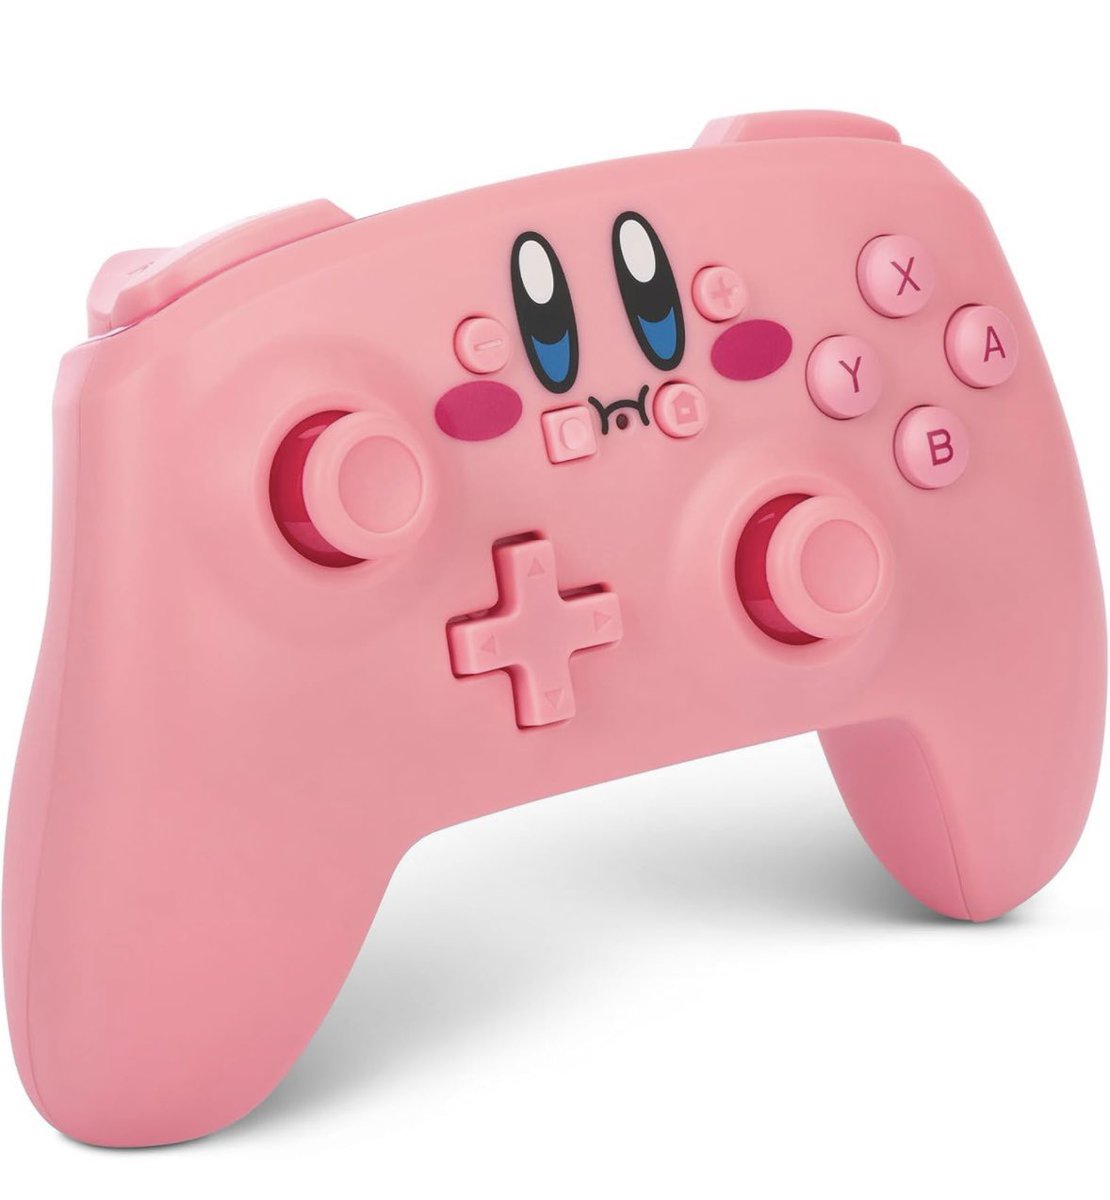 nobody: kirby: am litrly a controller